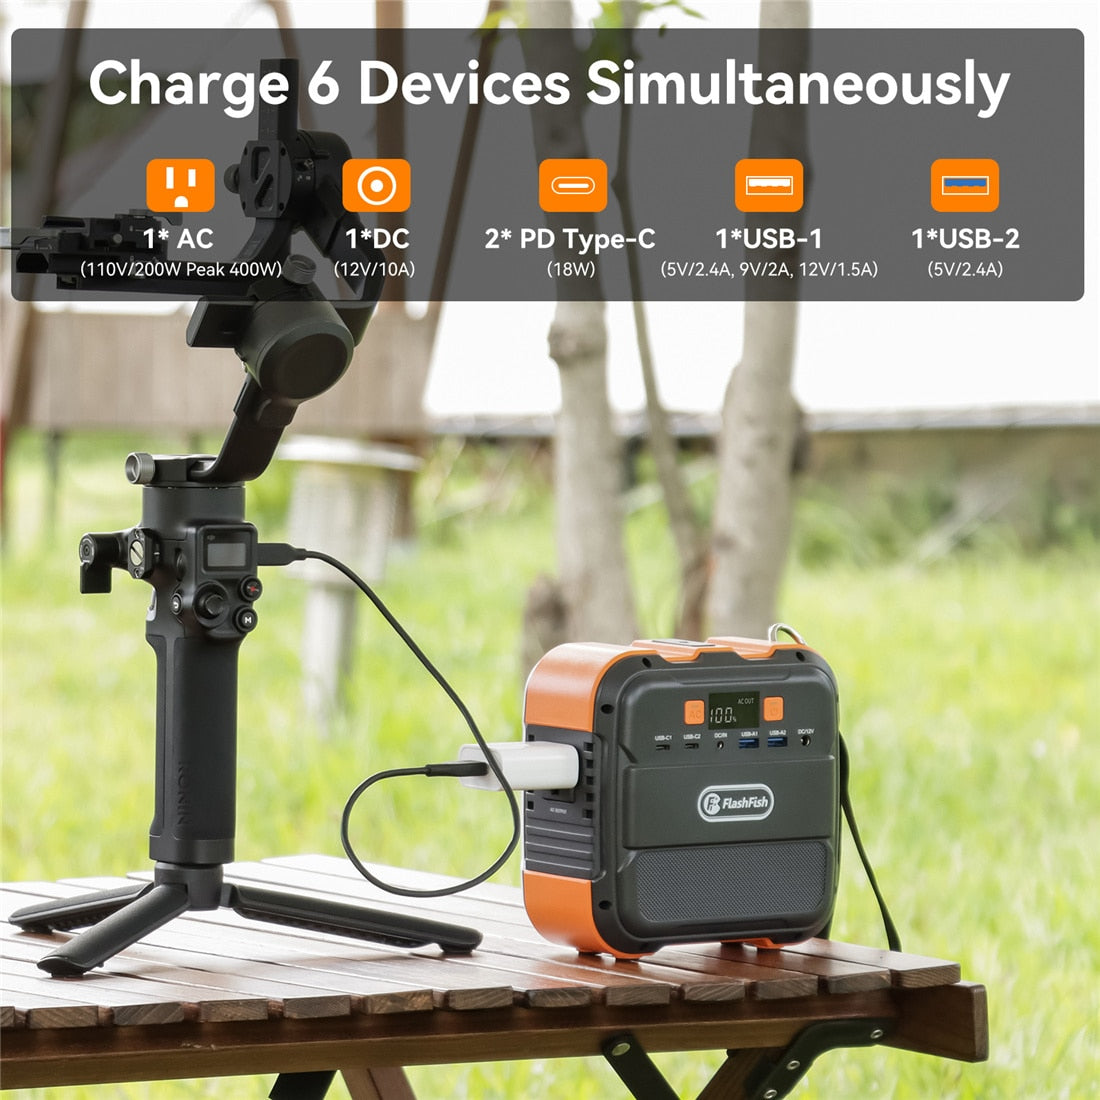 FF Flashfish A101, Charge 6 Devices Simultaneously 1*AC 1